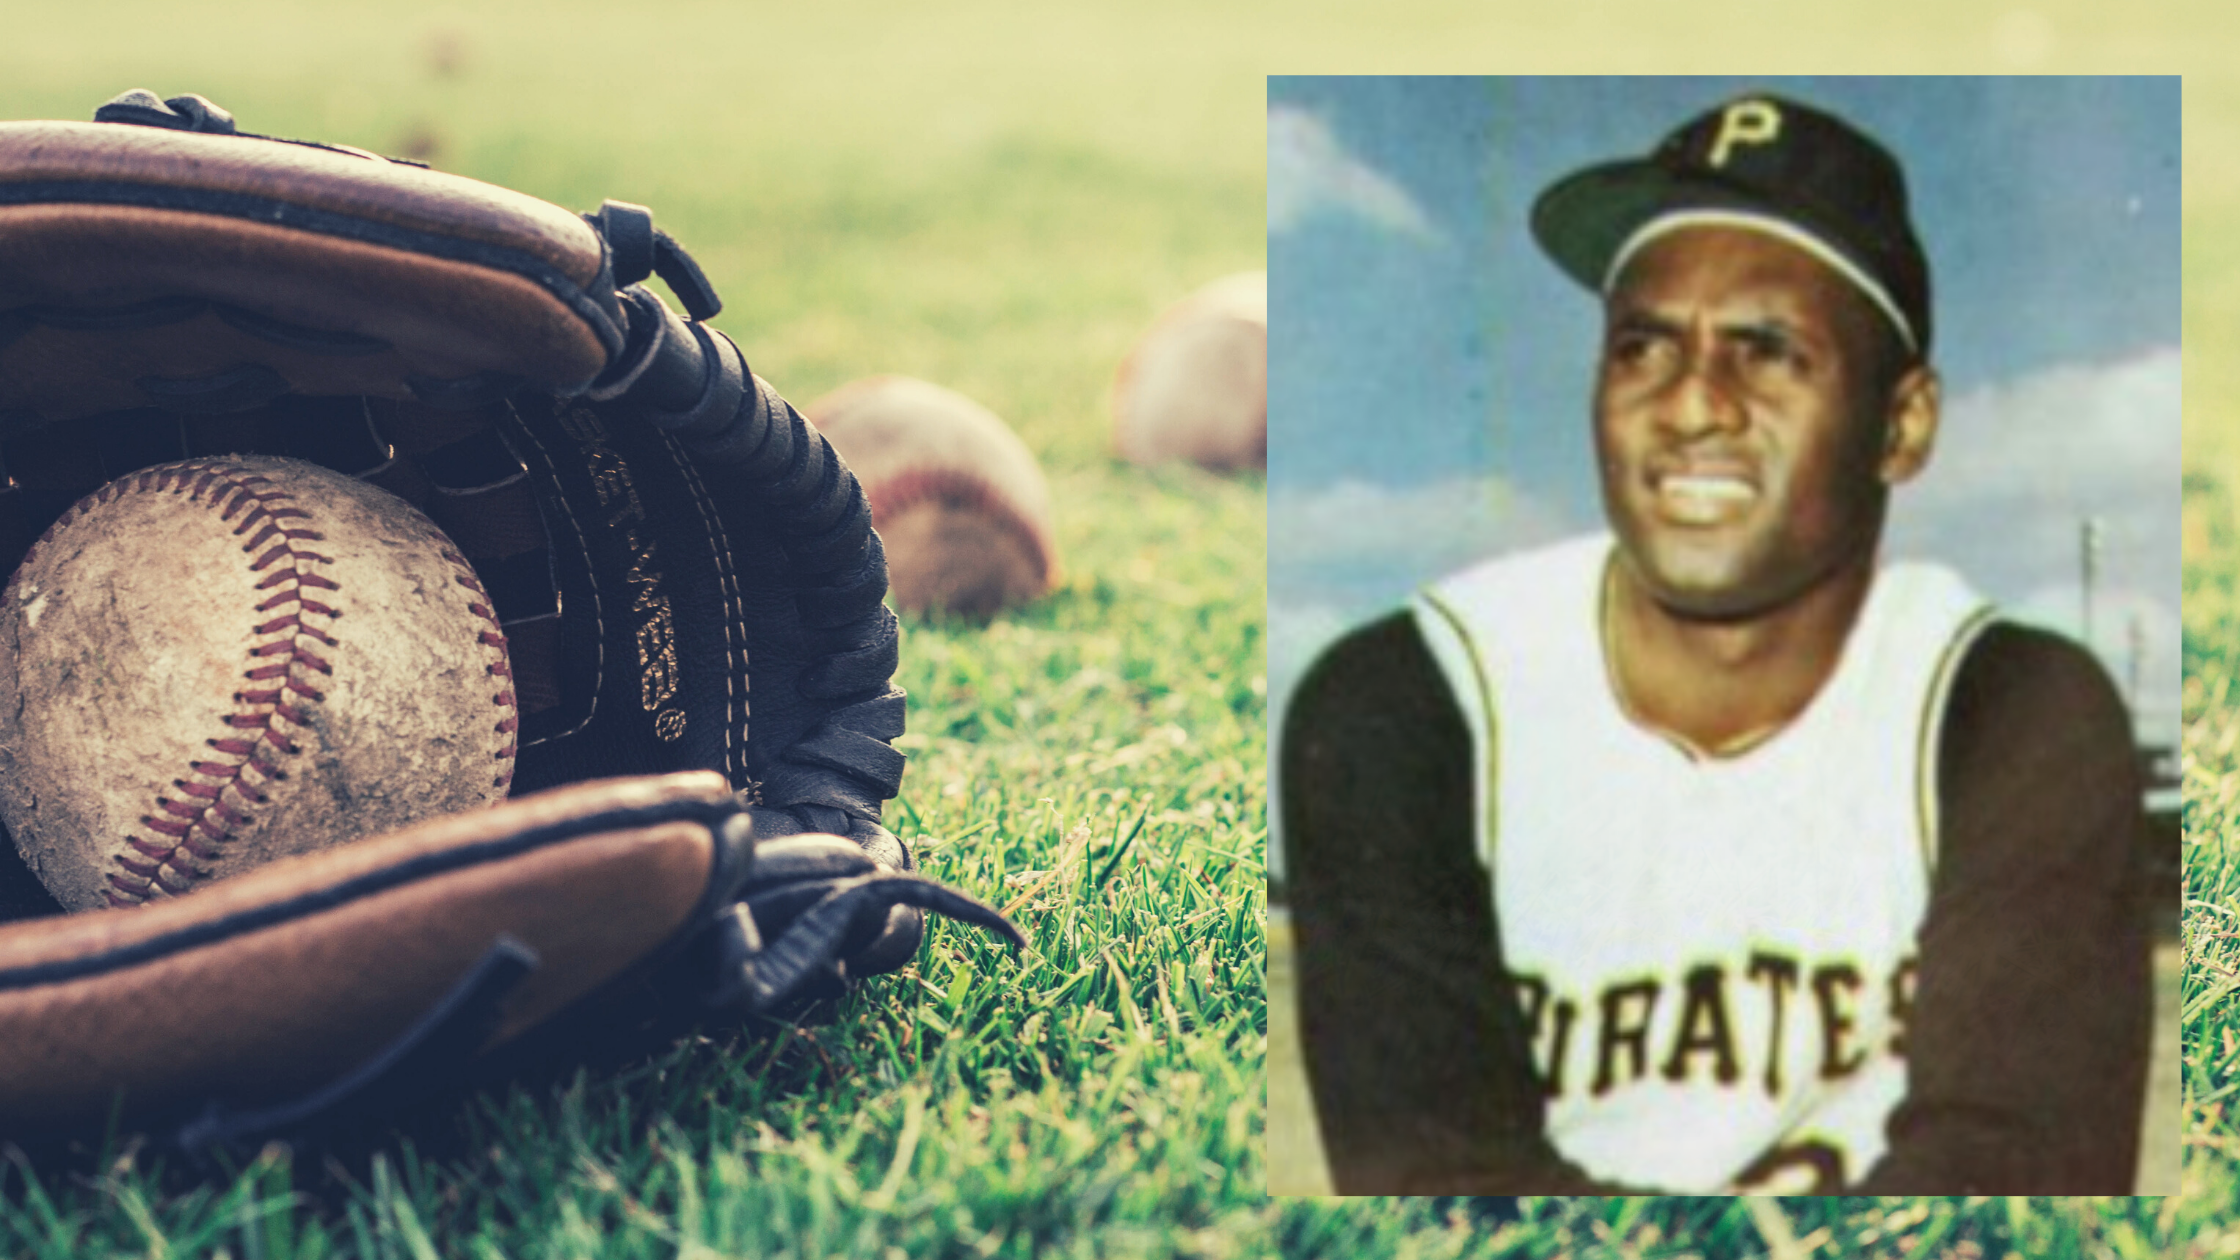 Pittsburgh Pirates to wear No. 21 on Sept. 9 to honor Roberto Clemente